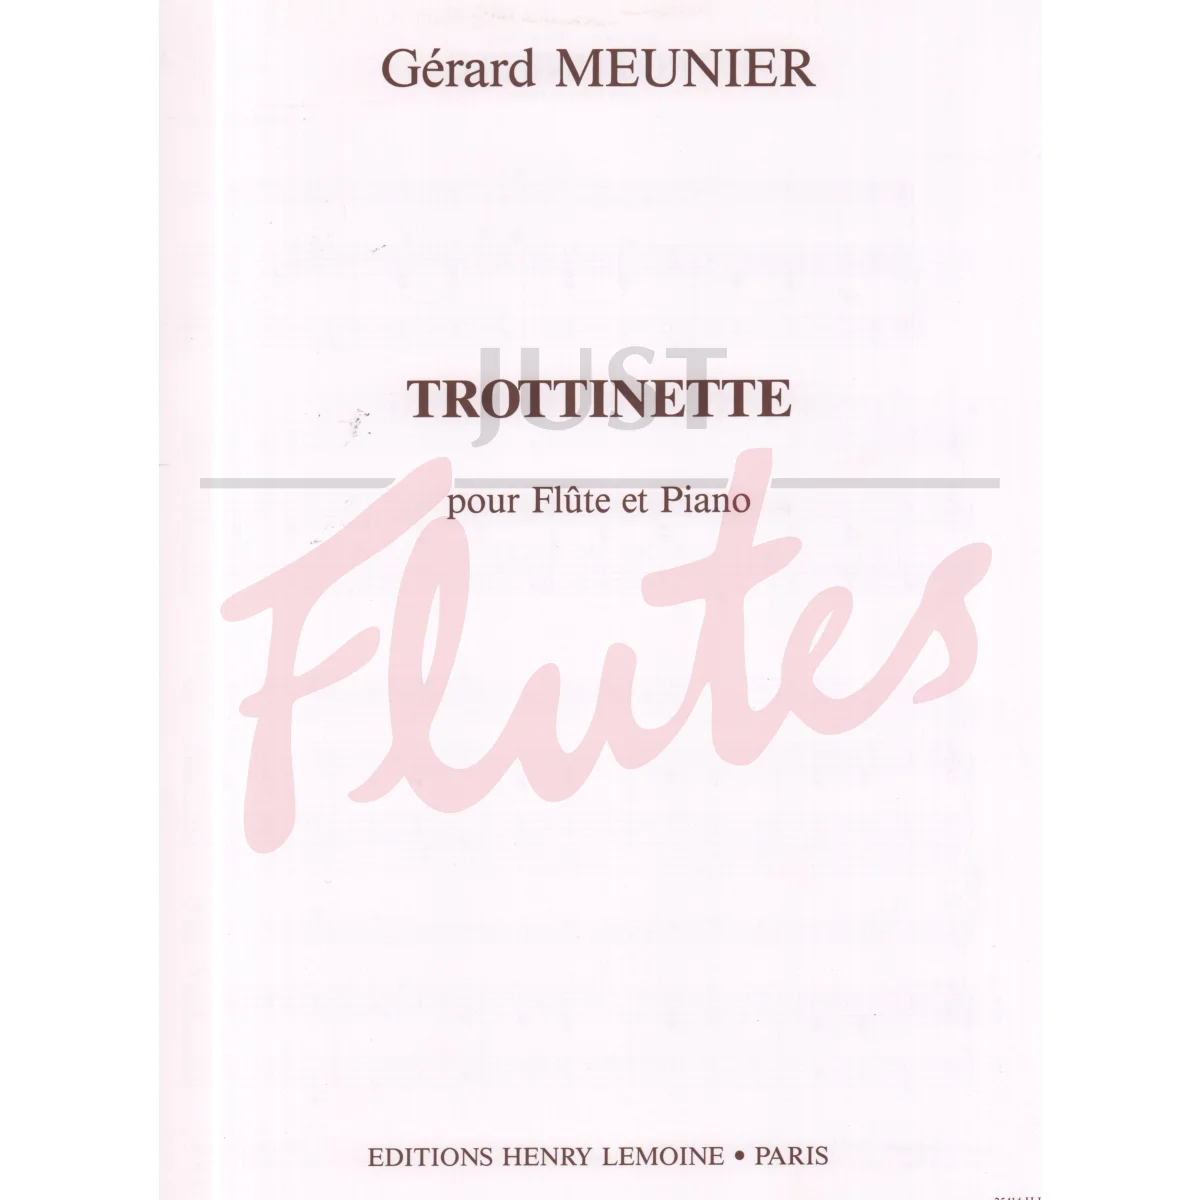 Trottinette for Flute and Piano